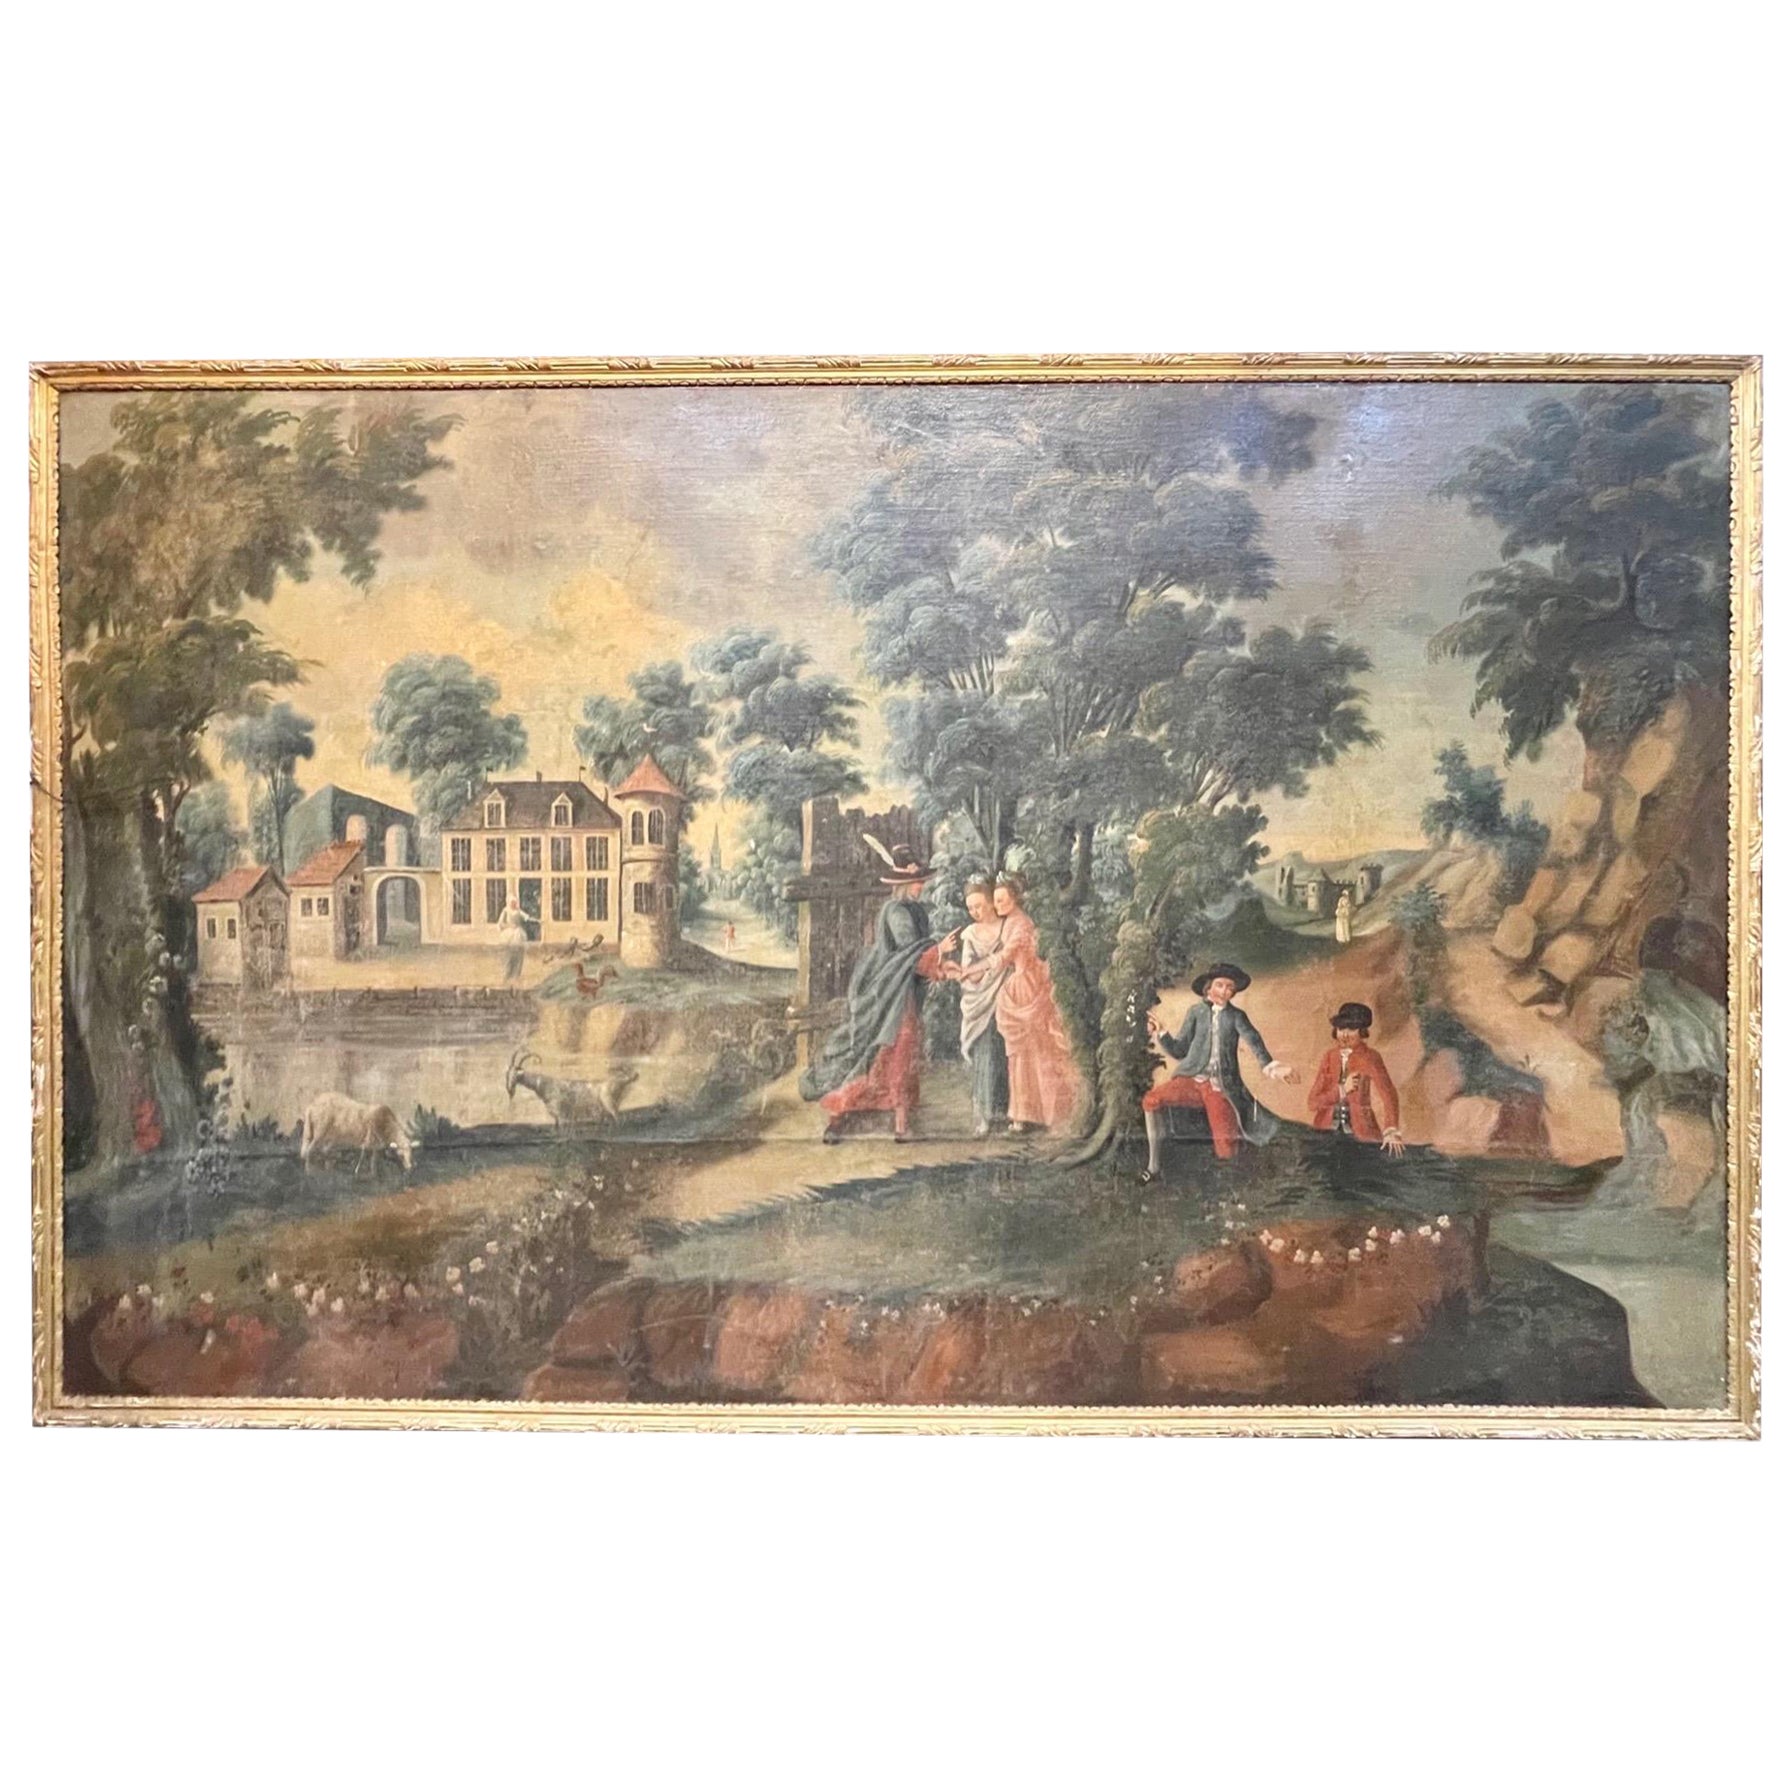 Large Scale 19th Century French Framed Oil on Canvas Painting